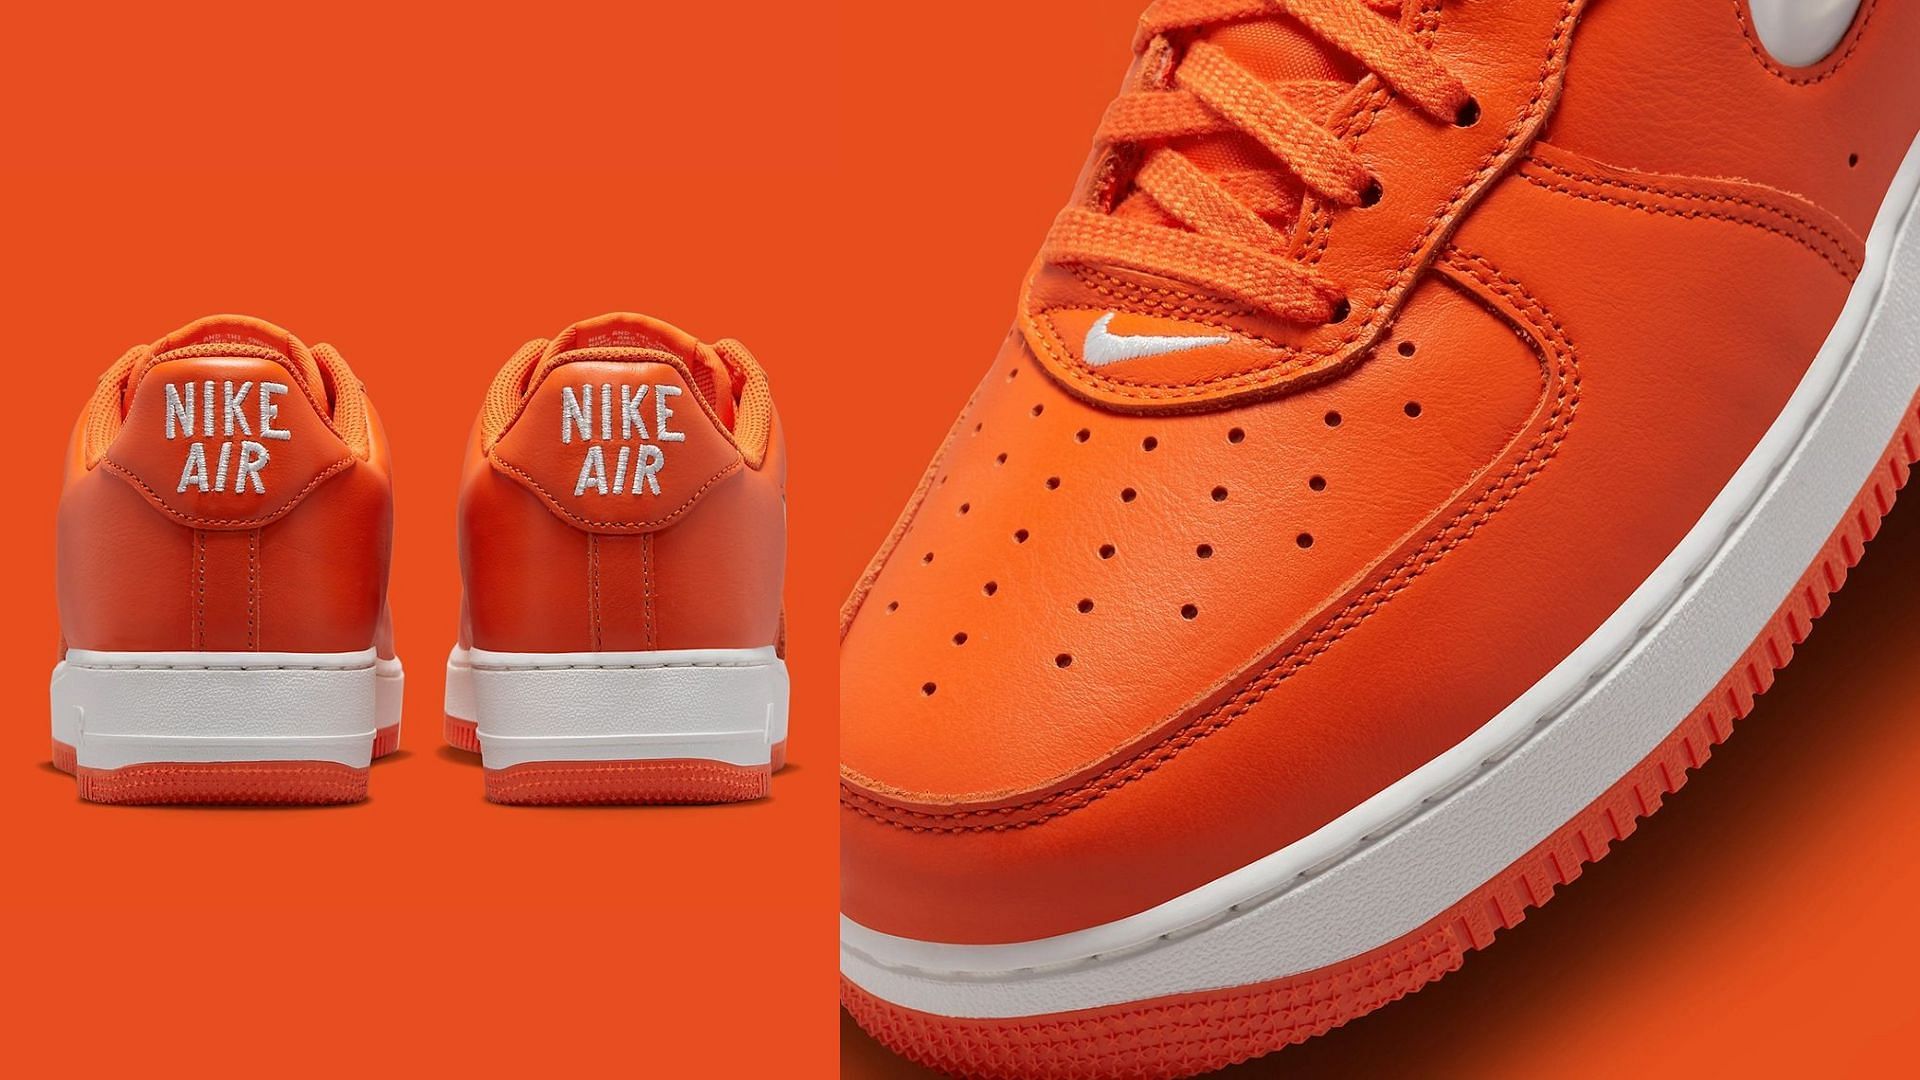 Take a look at the heel counters and toe tops of these shoes (Image via Nike)